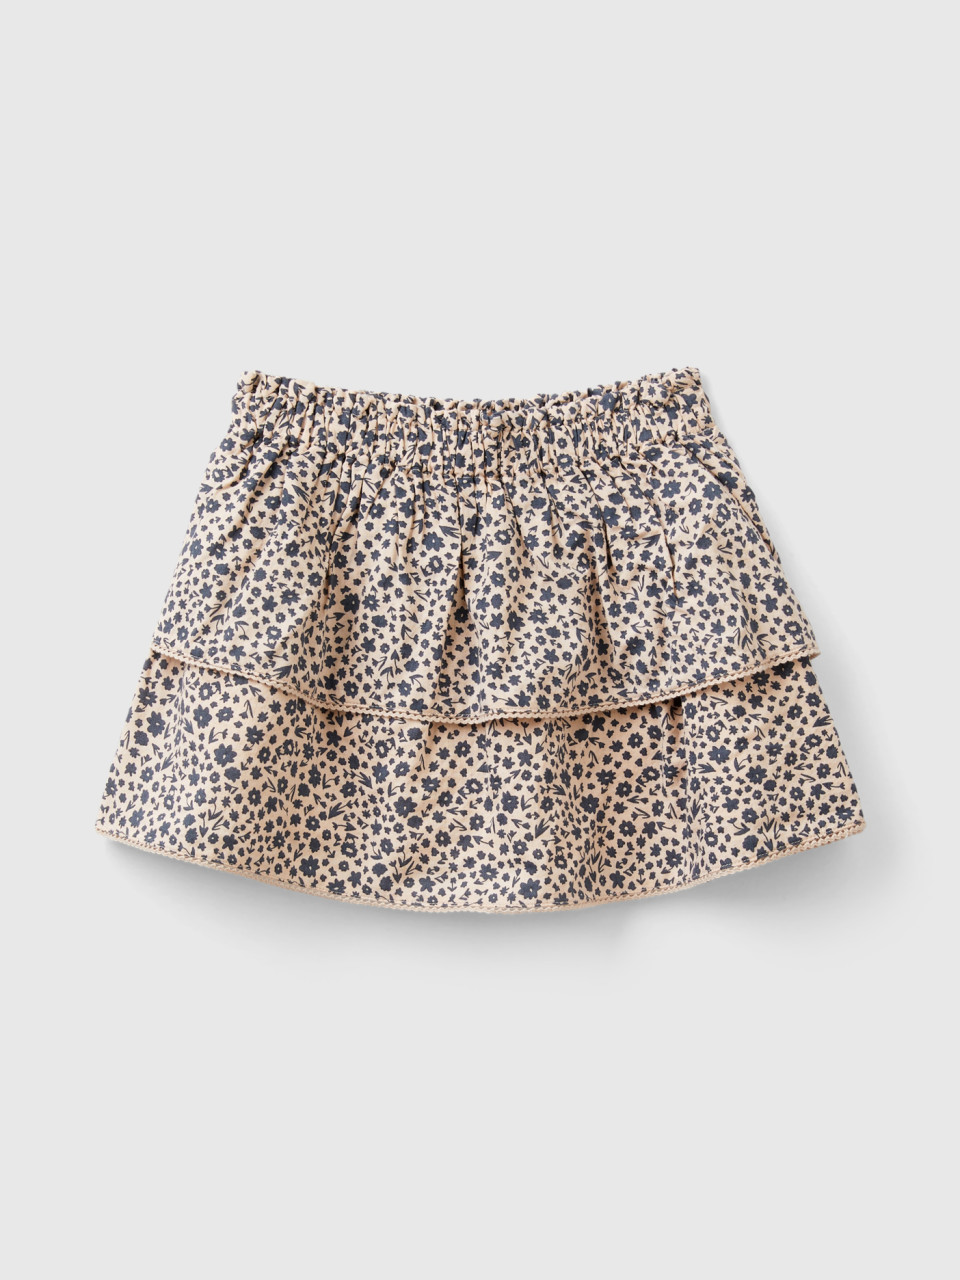 Benetton, Flounced Skirt With Floral Print, Soft Pink, Kids